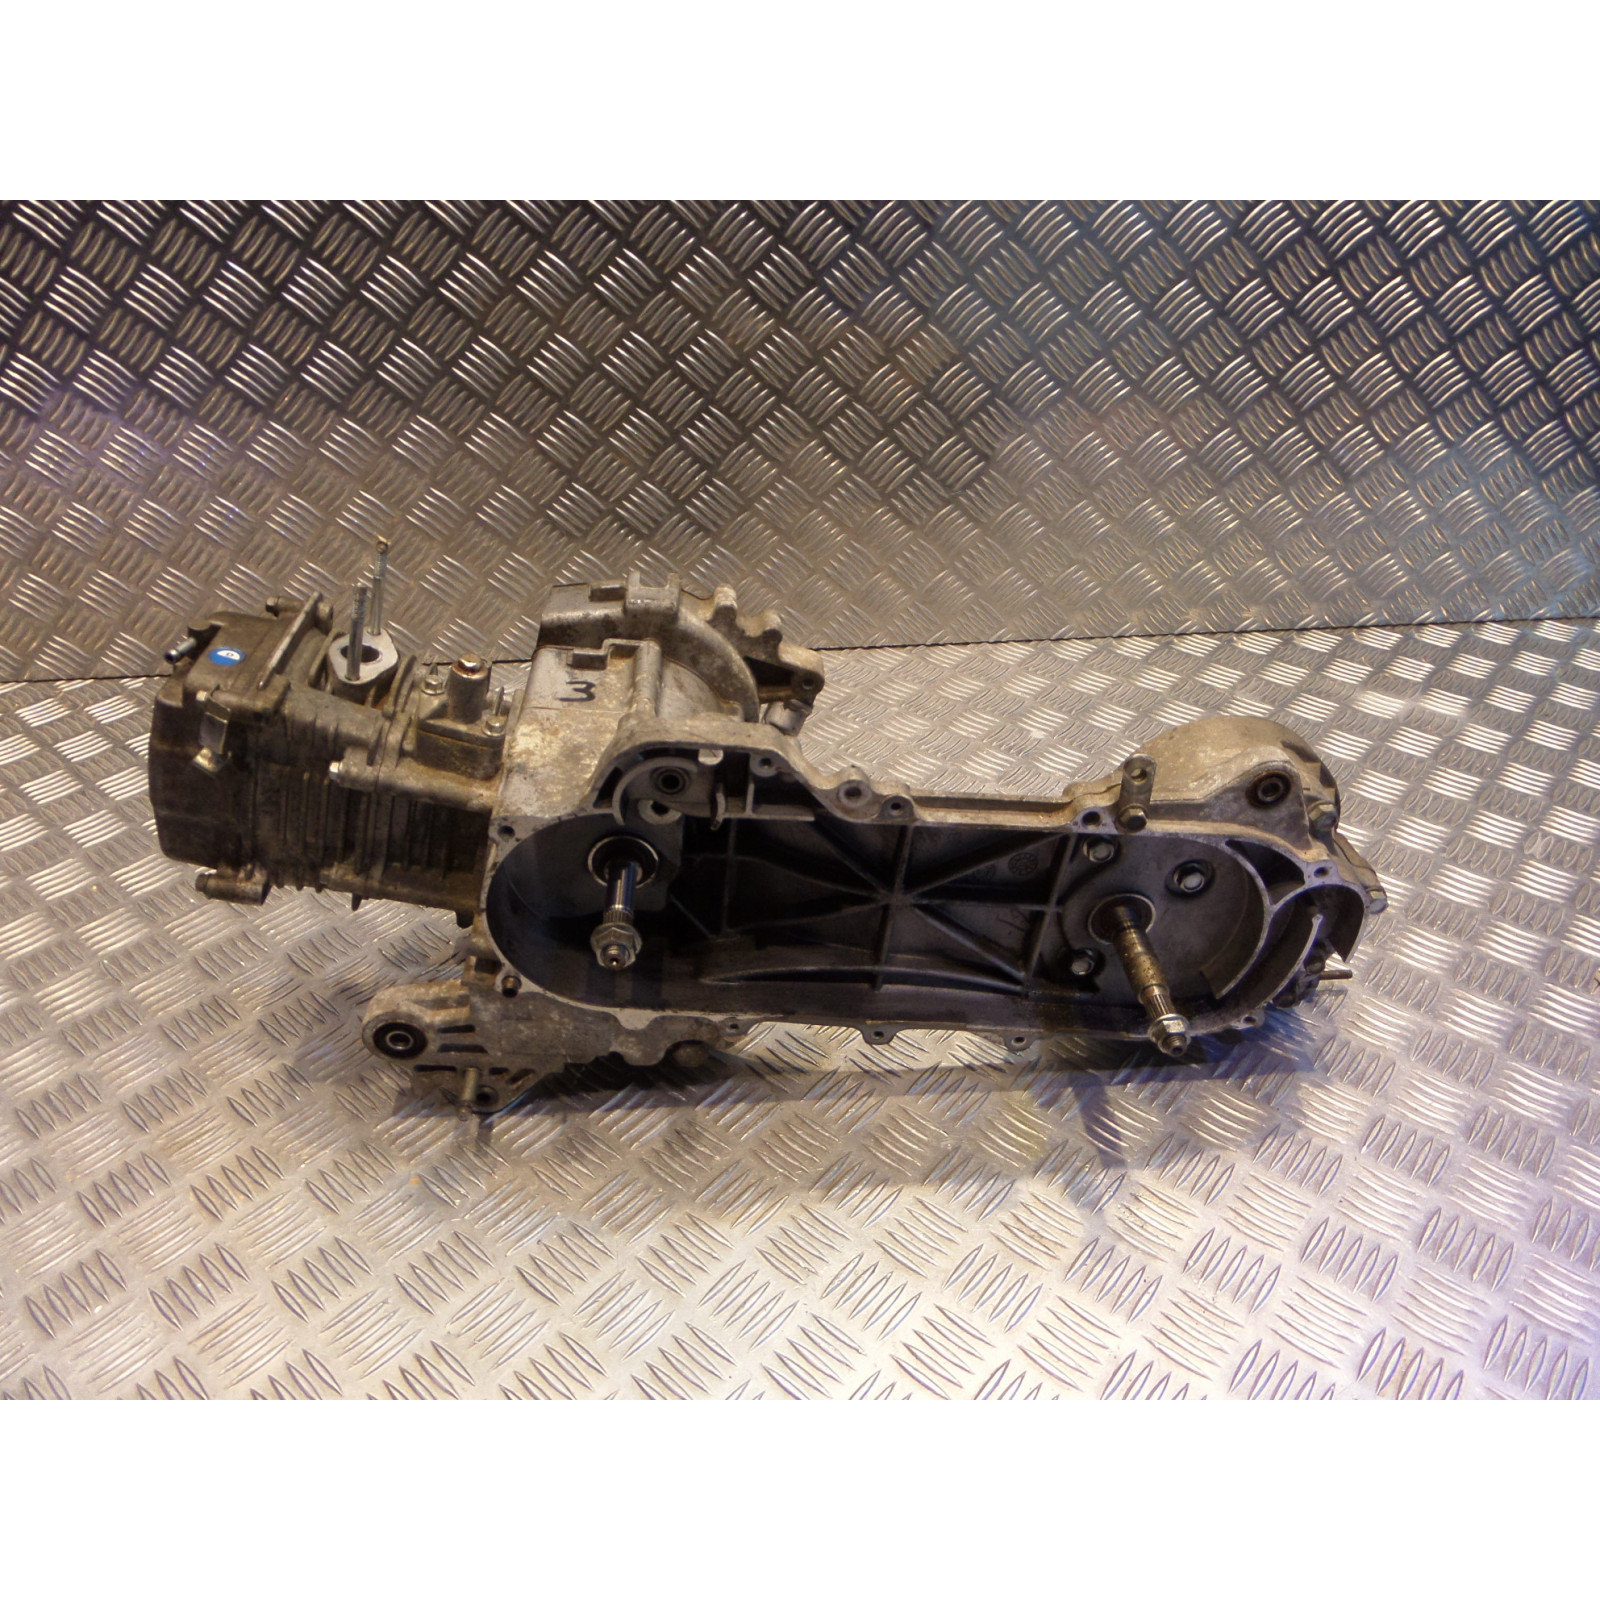 moteur scooter chinois 50 gy6 4 temps 139qma bt139qma